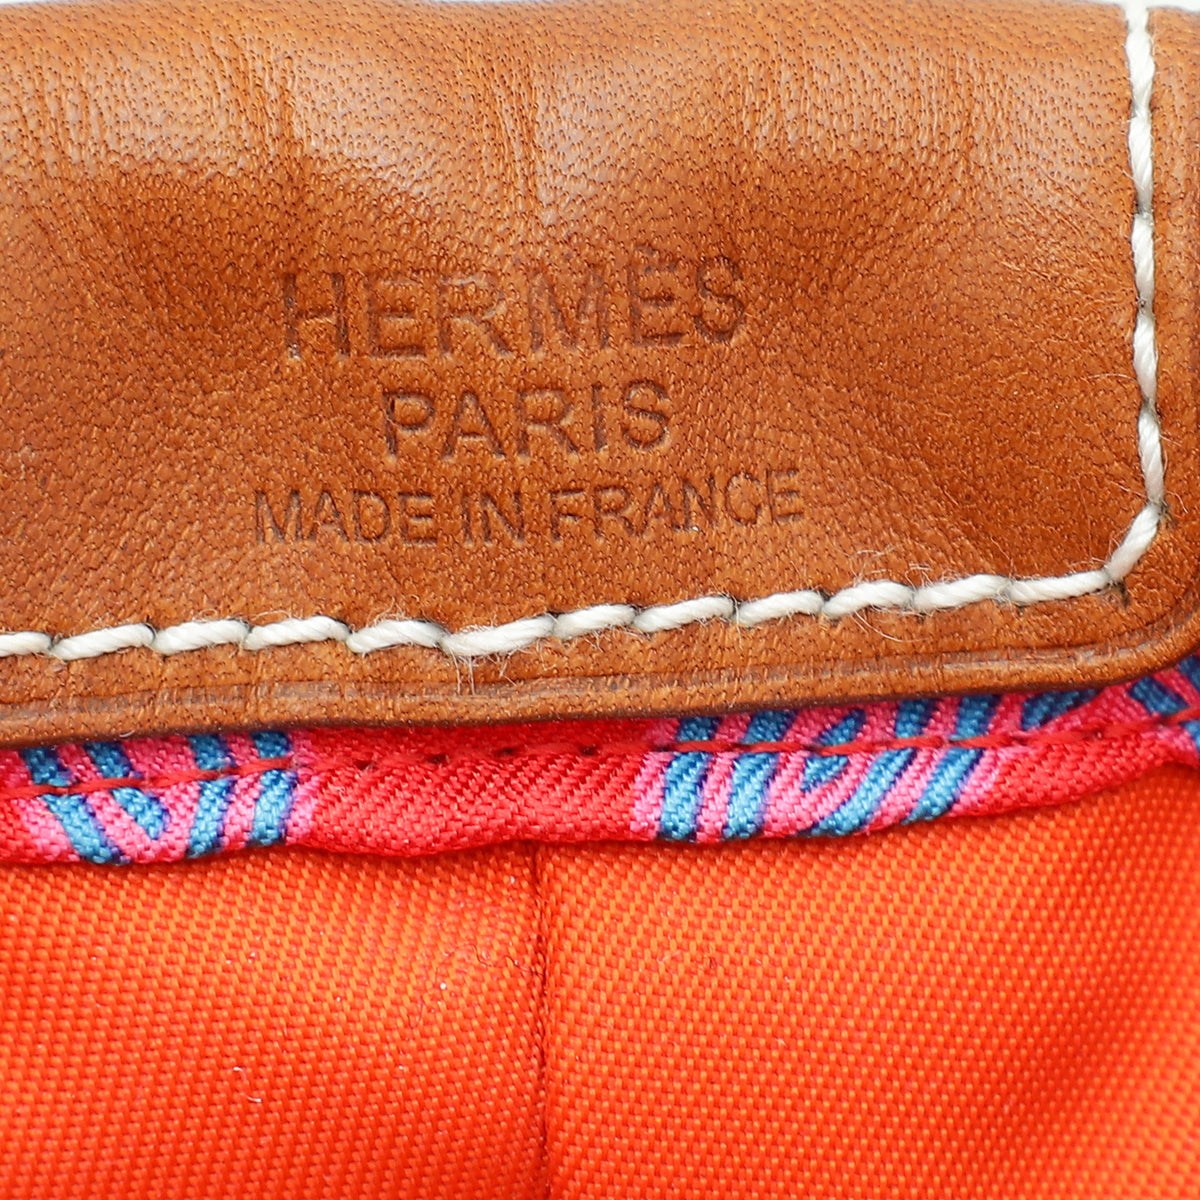 Hermes Bicolor Fourbi 20 "Noeud Marin" Print Pouch